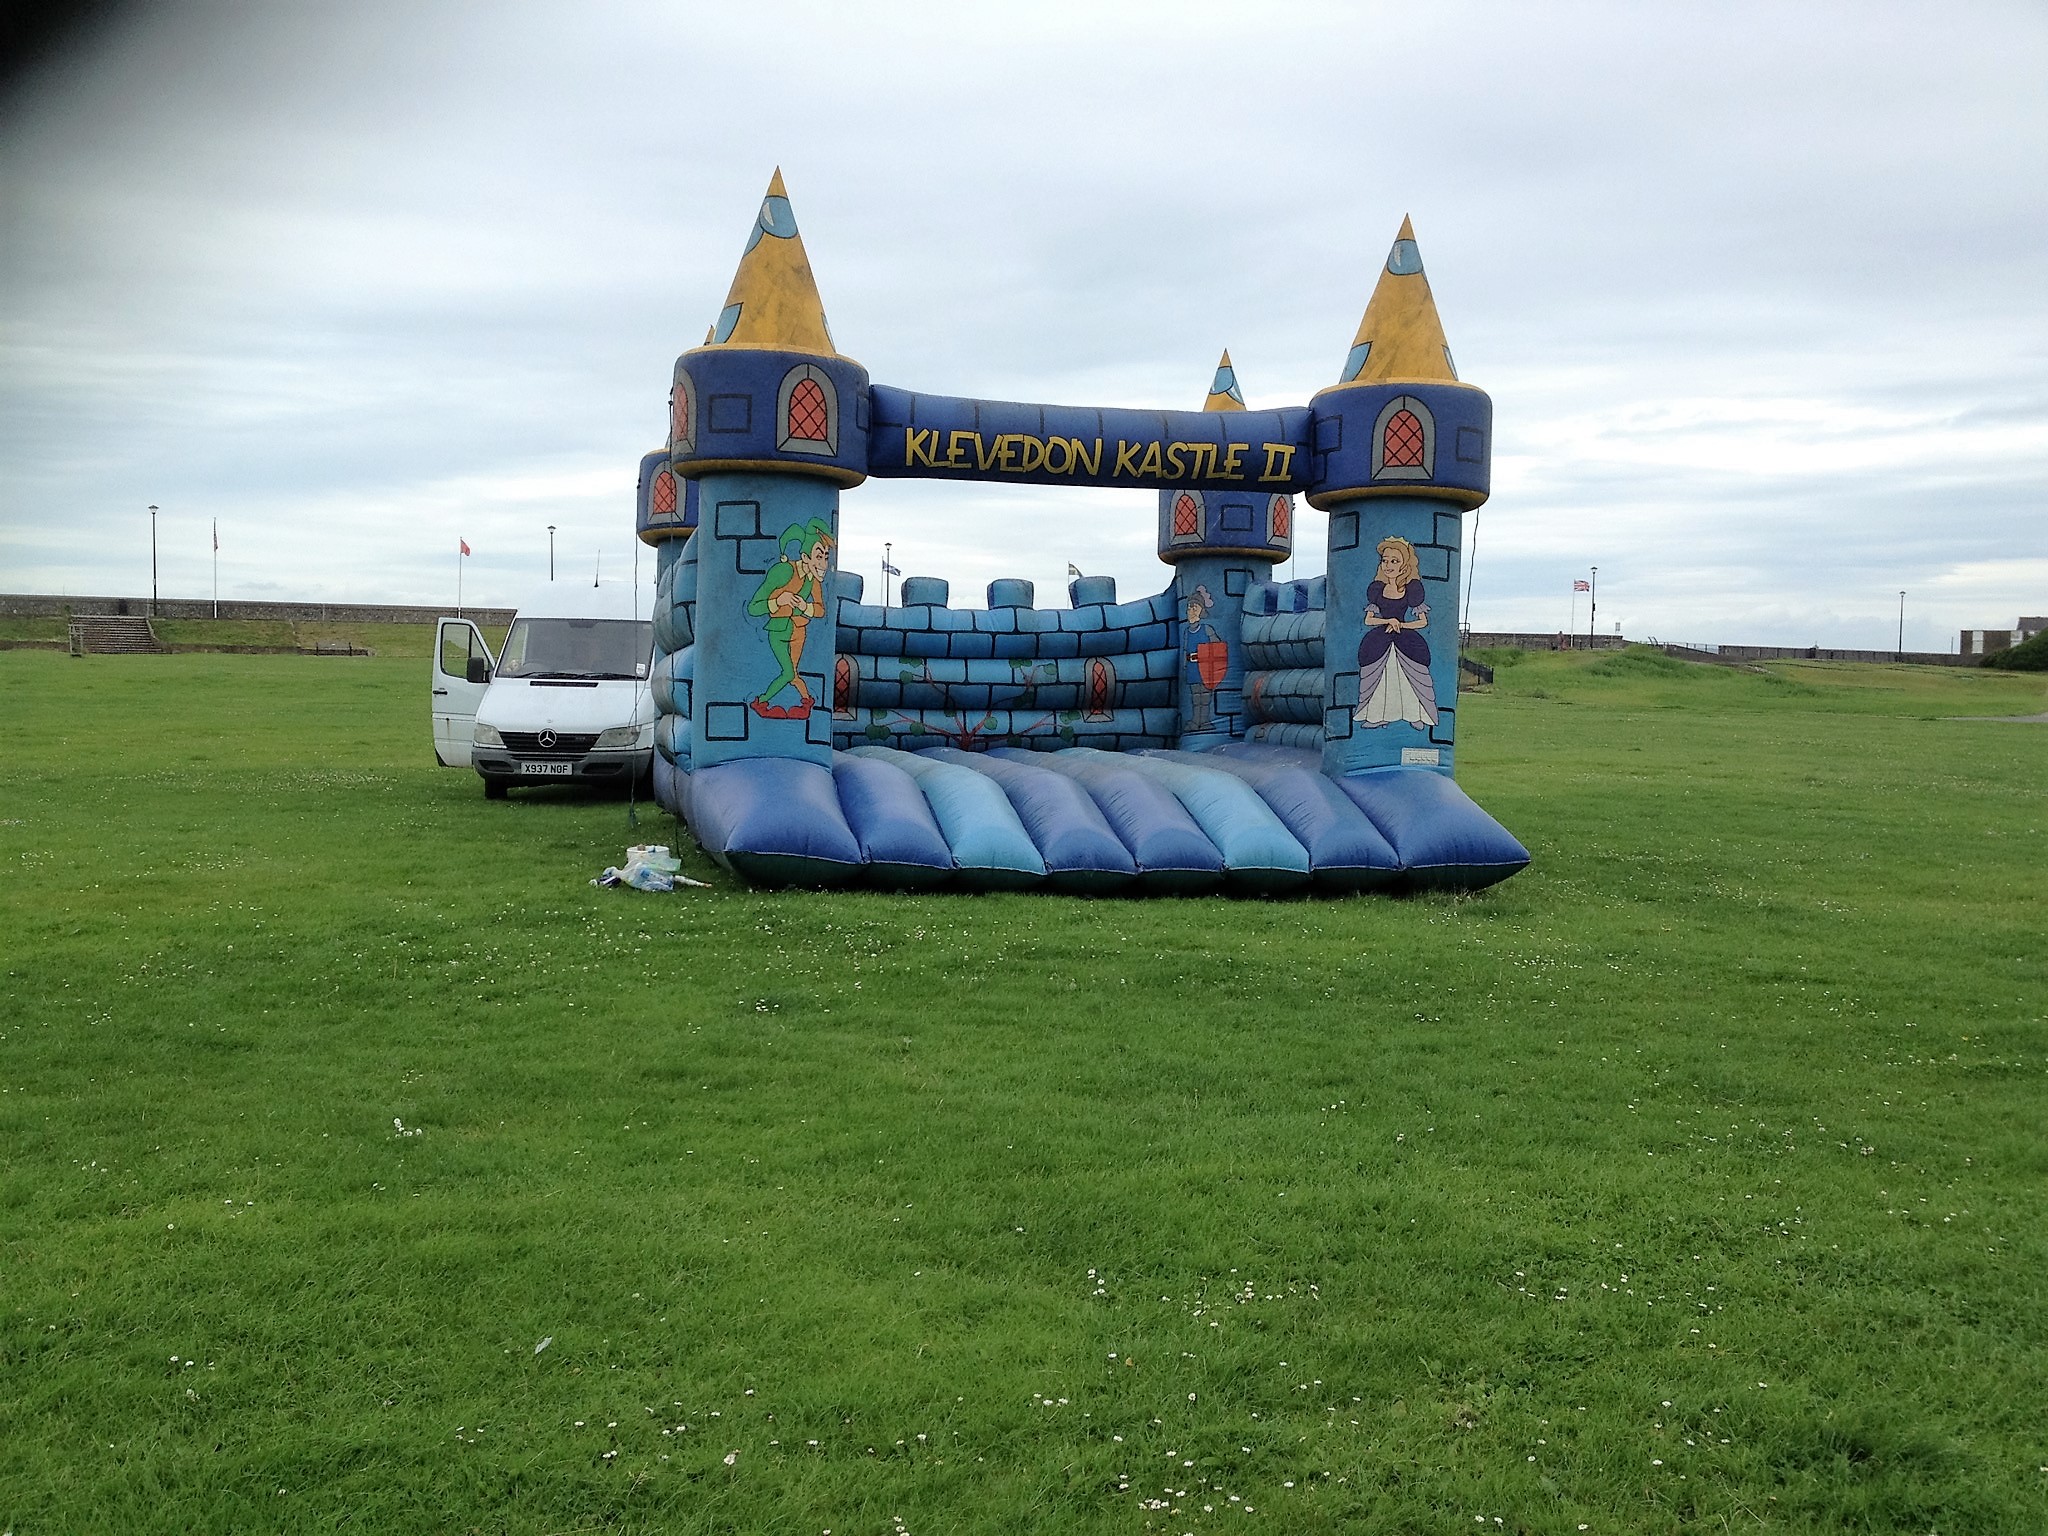 This huge castle is great for corporate events such as fetes and school proms, with an interesting spelling of our little local town! Suitable for all ages.